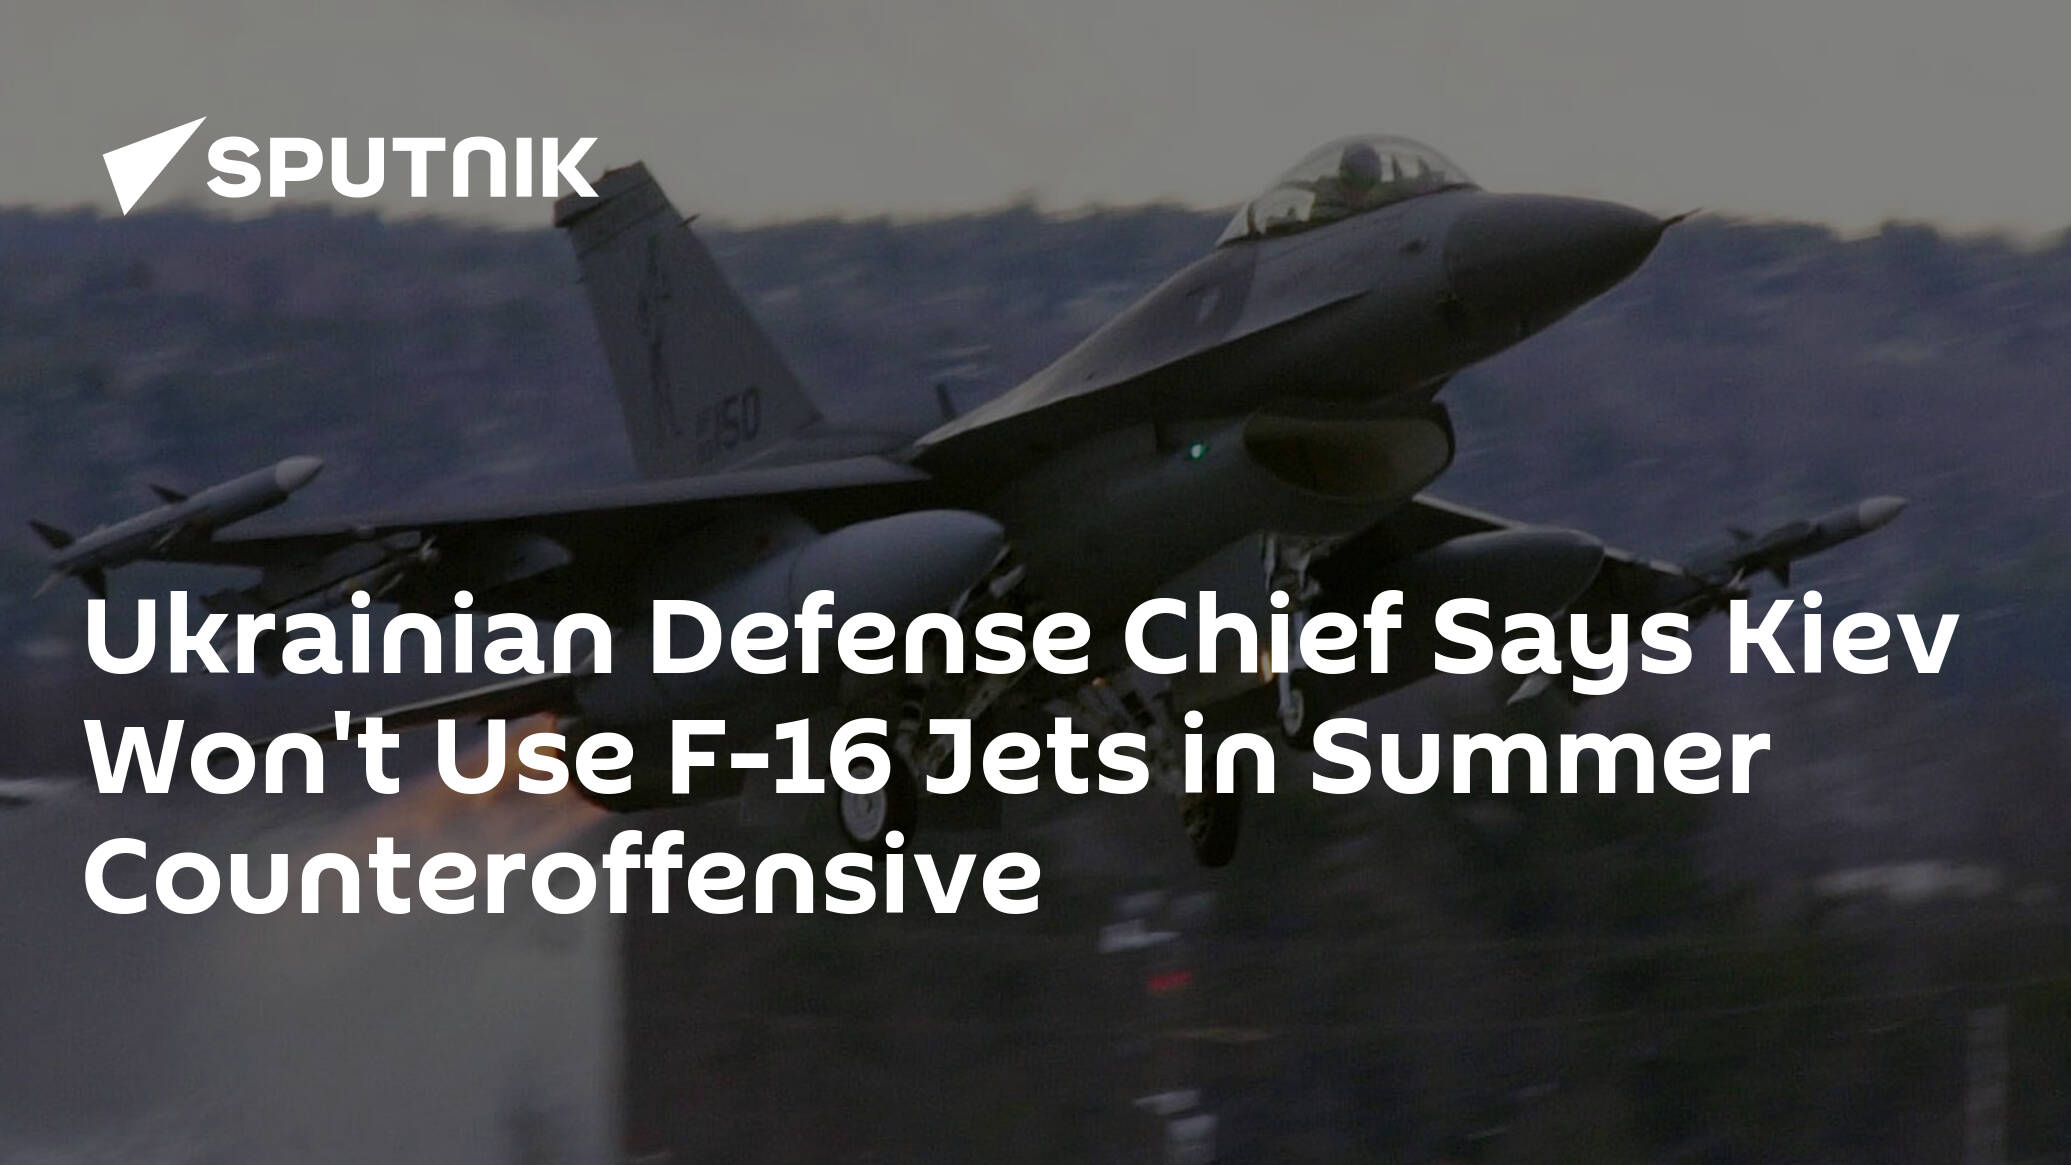 Ukrainian Defense Chief Says Kiev Won't Use F-16 Jets in Summer Counteroffensive